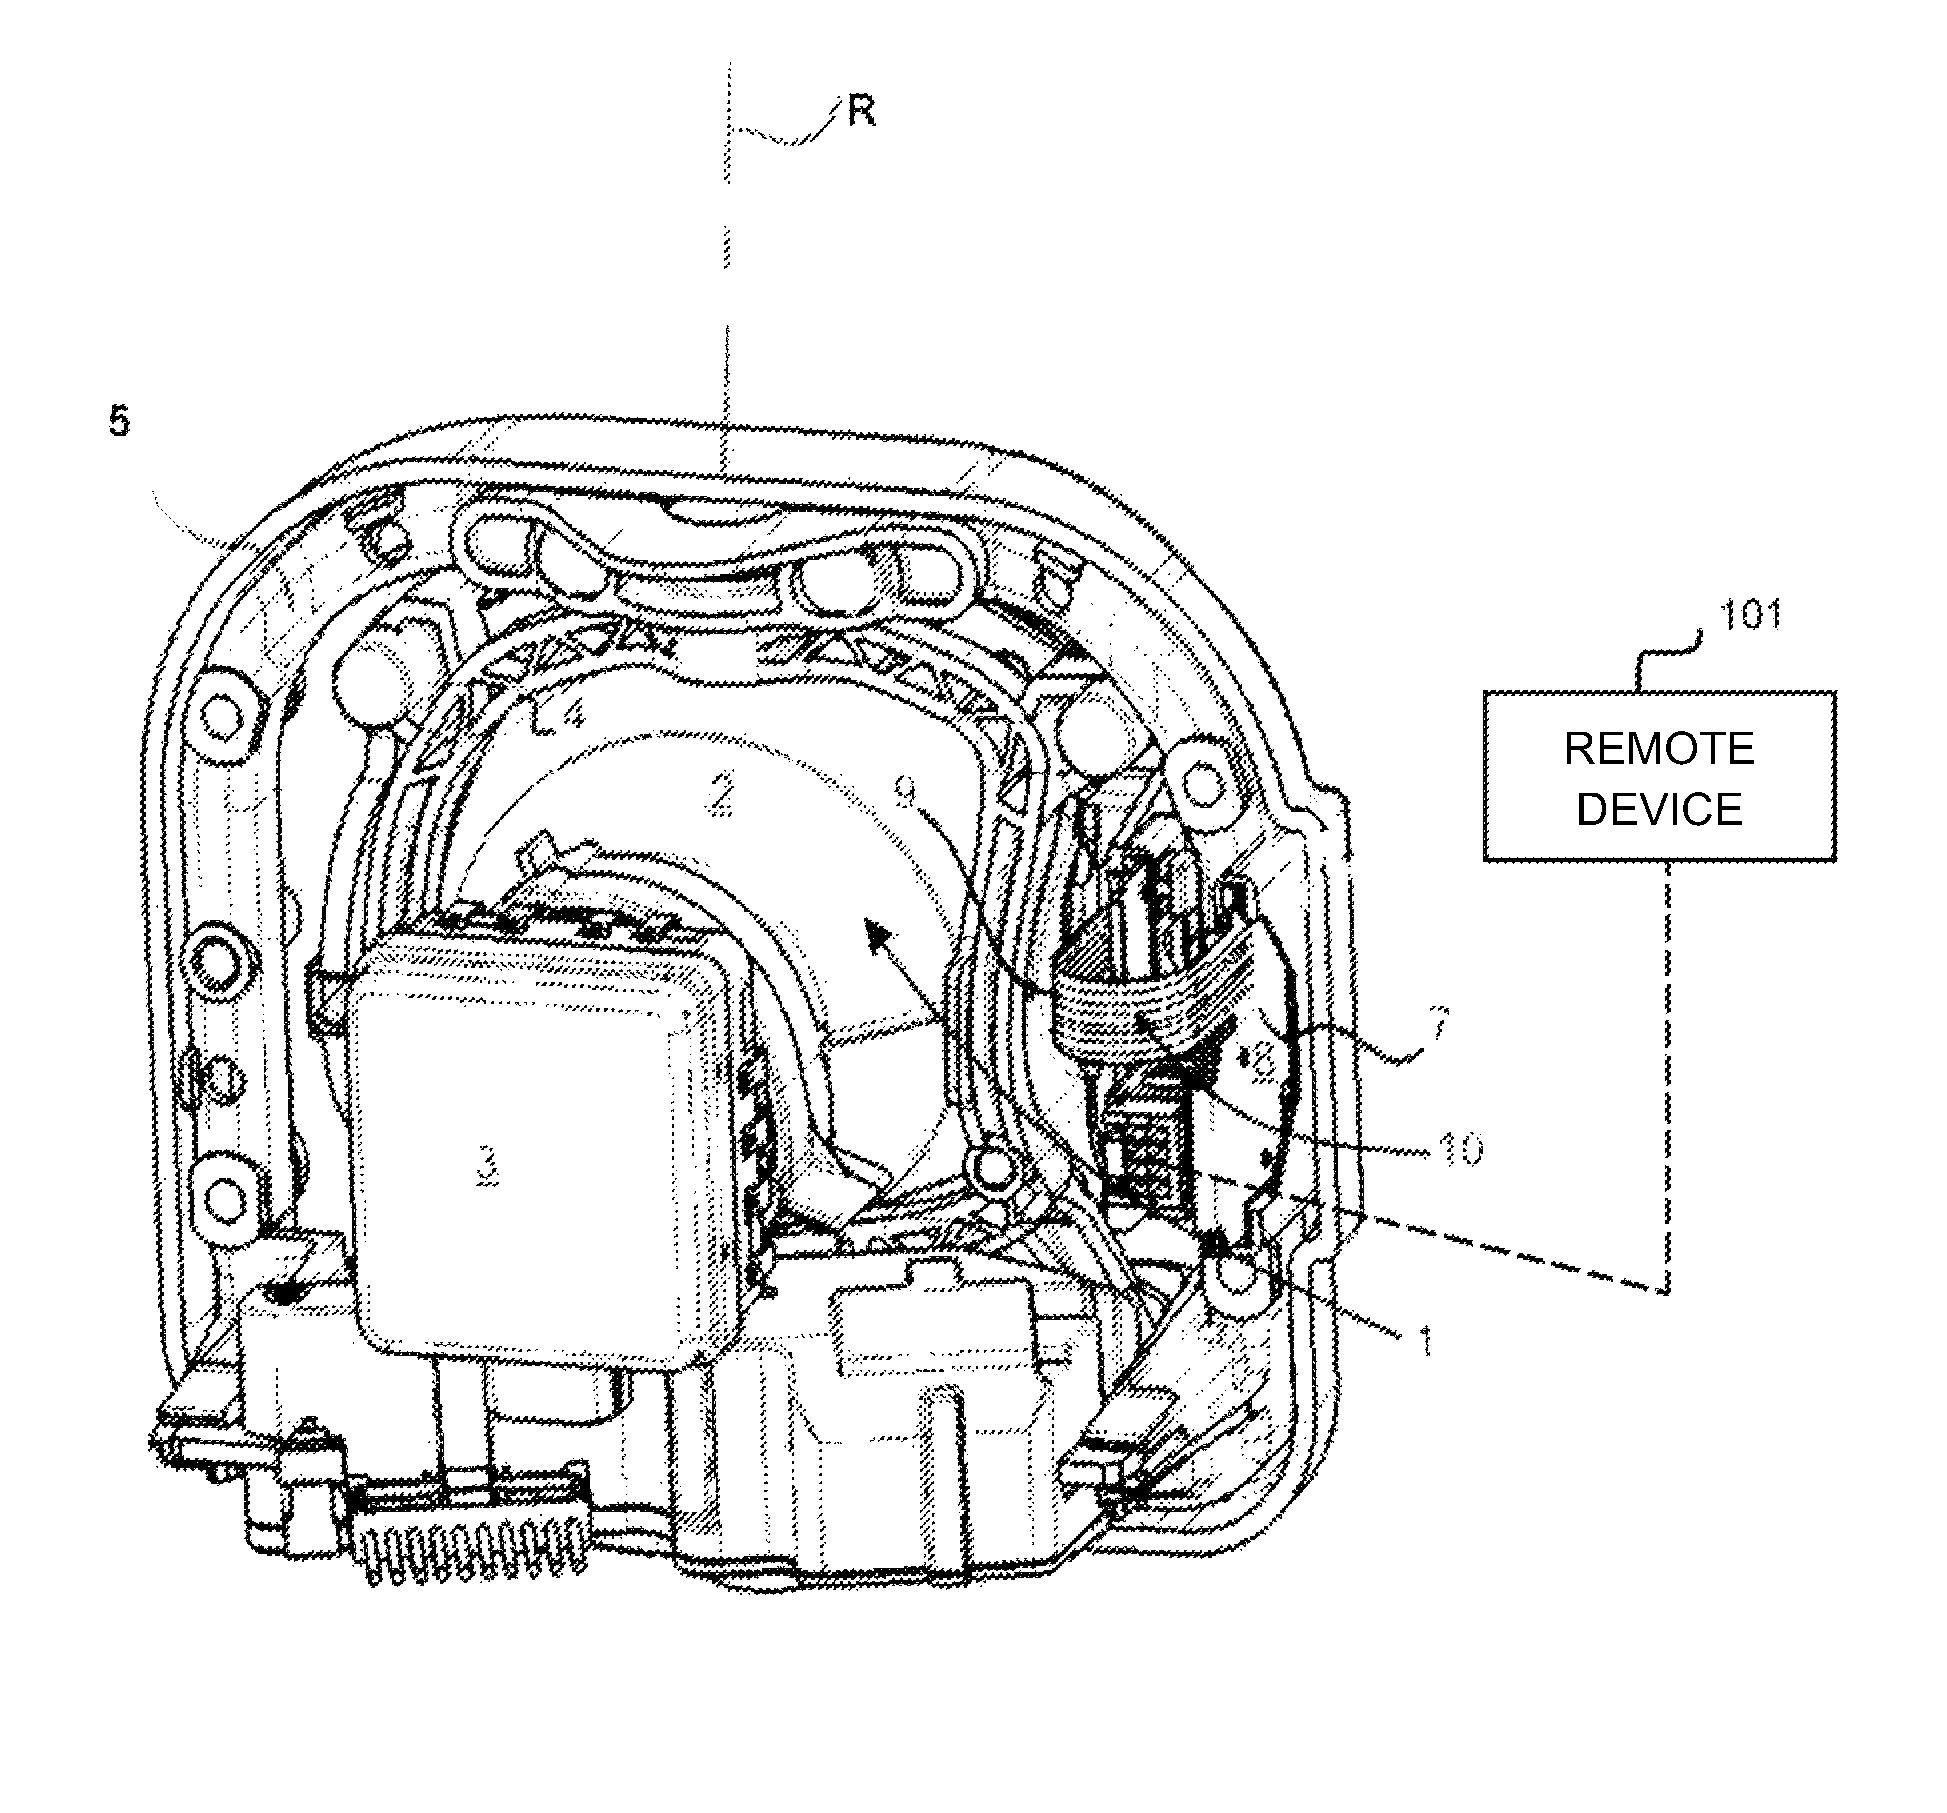 Optical module for motor vehicle headlamp equipped with a device for electrical connection to remote devices